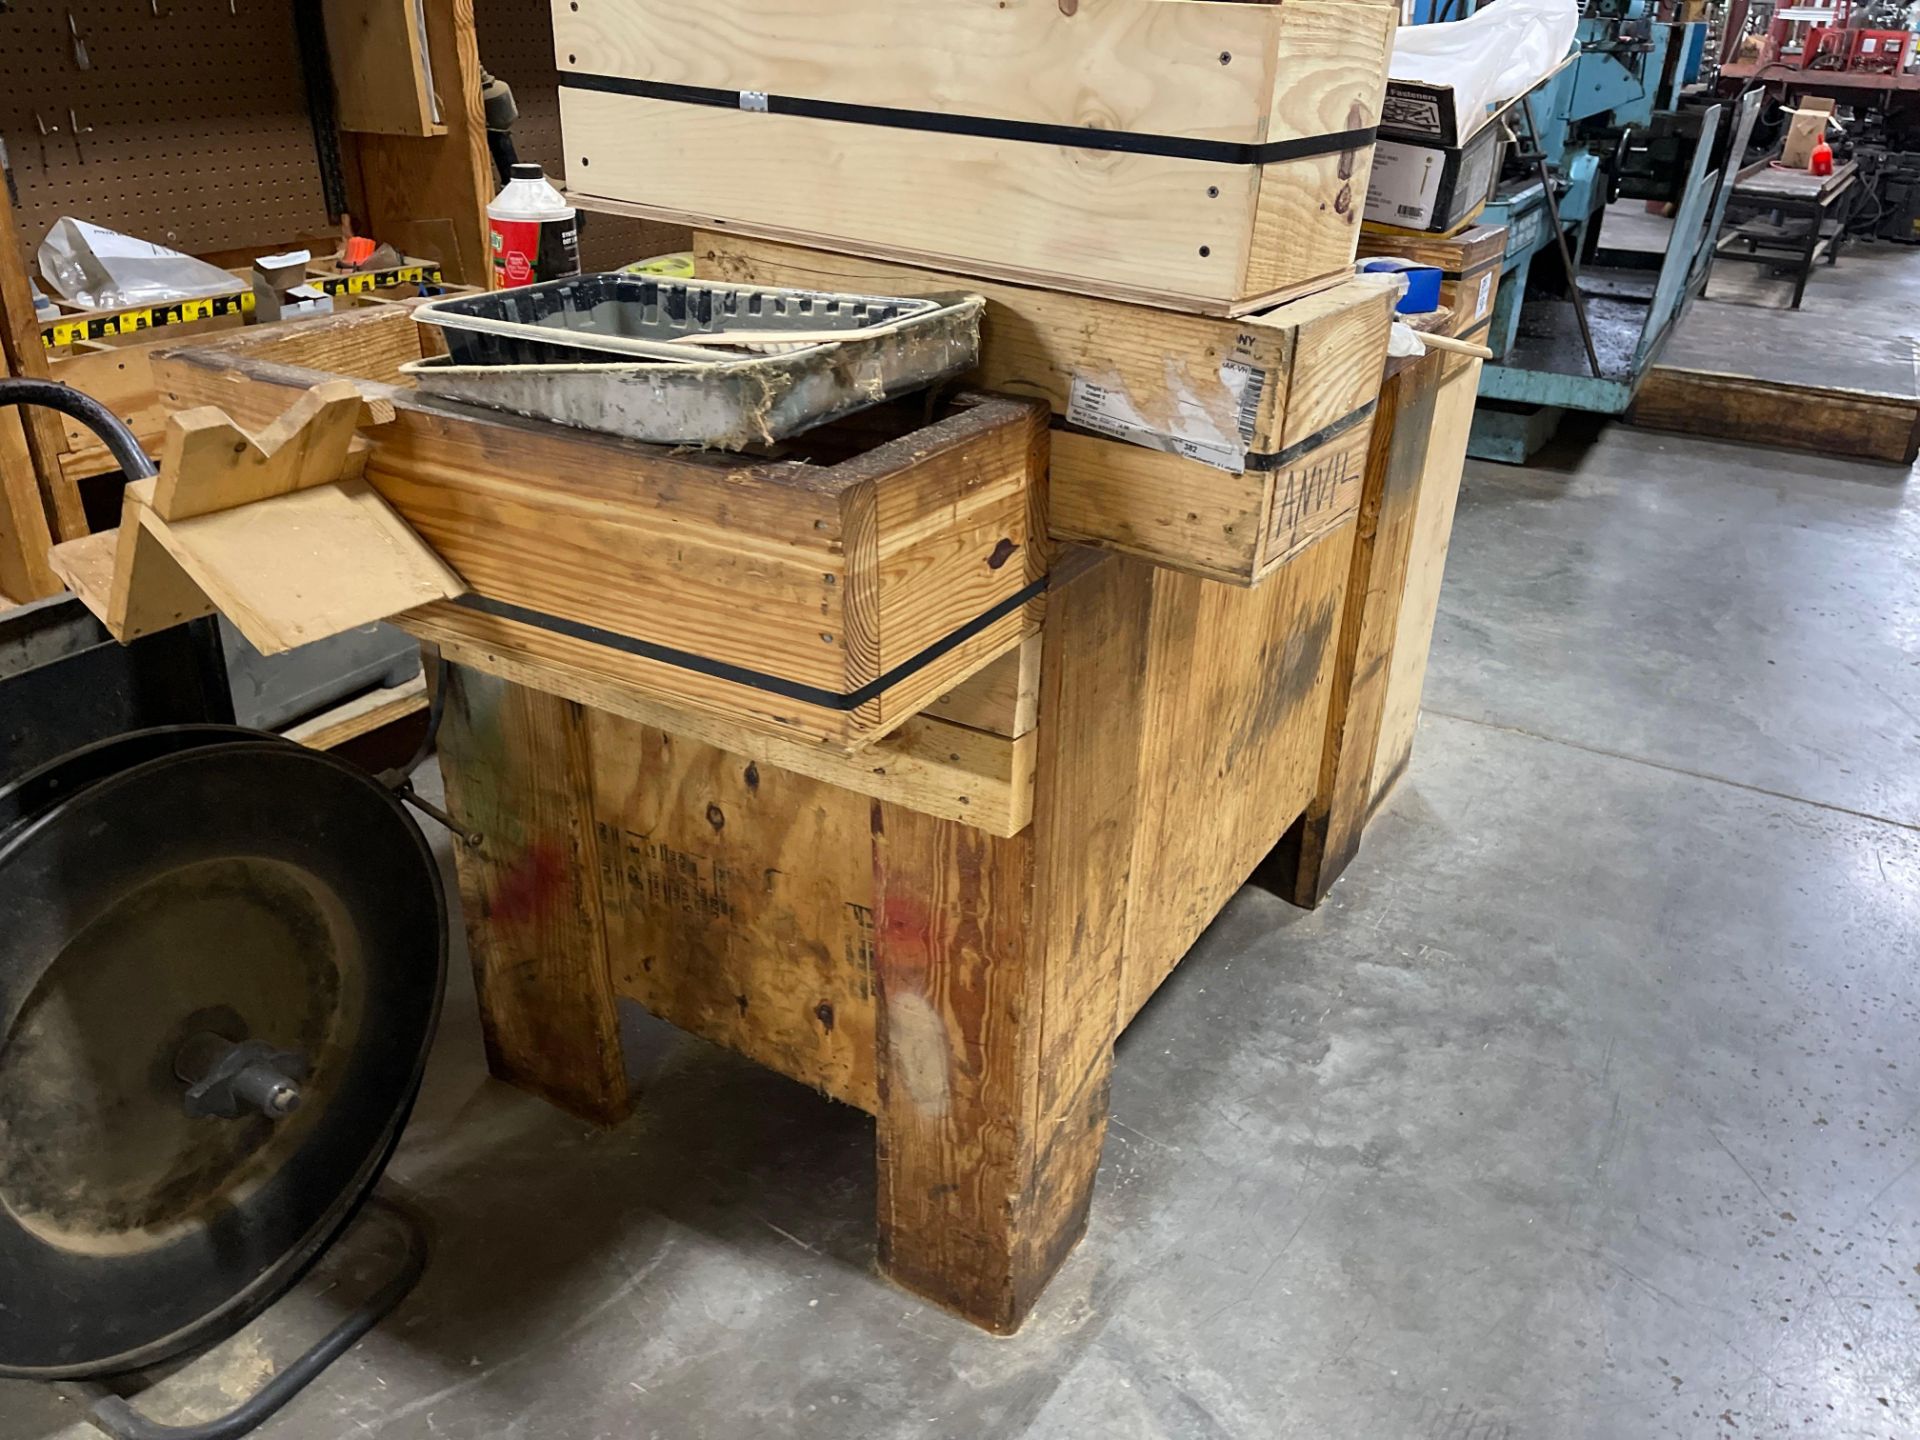 Wood Work Bench Strapping Station w/ Strapping Cart, Wood Crate and Contents - Image 4 of 6